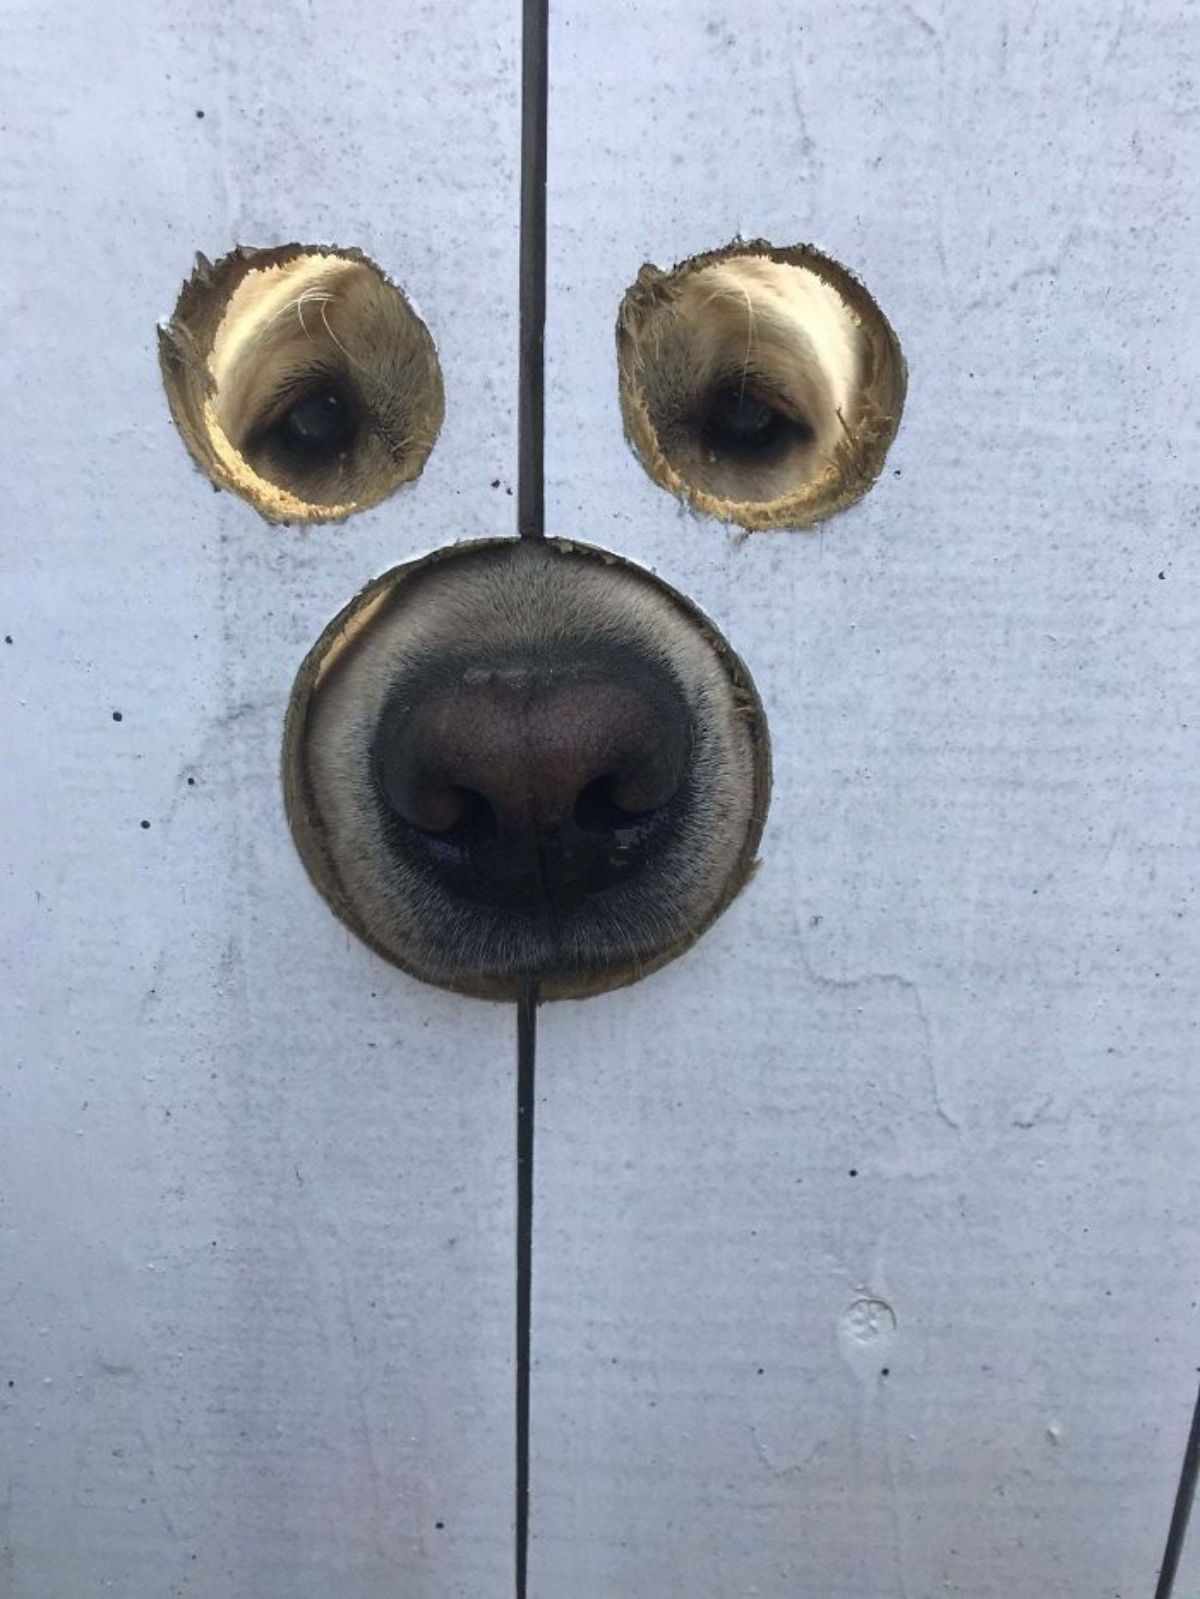 yellow labrador retriever looking through 2 eye holes and 1 nose hole in a white wooden fence